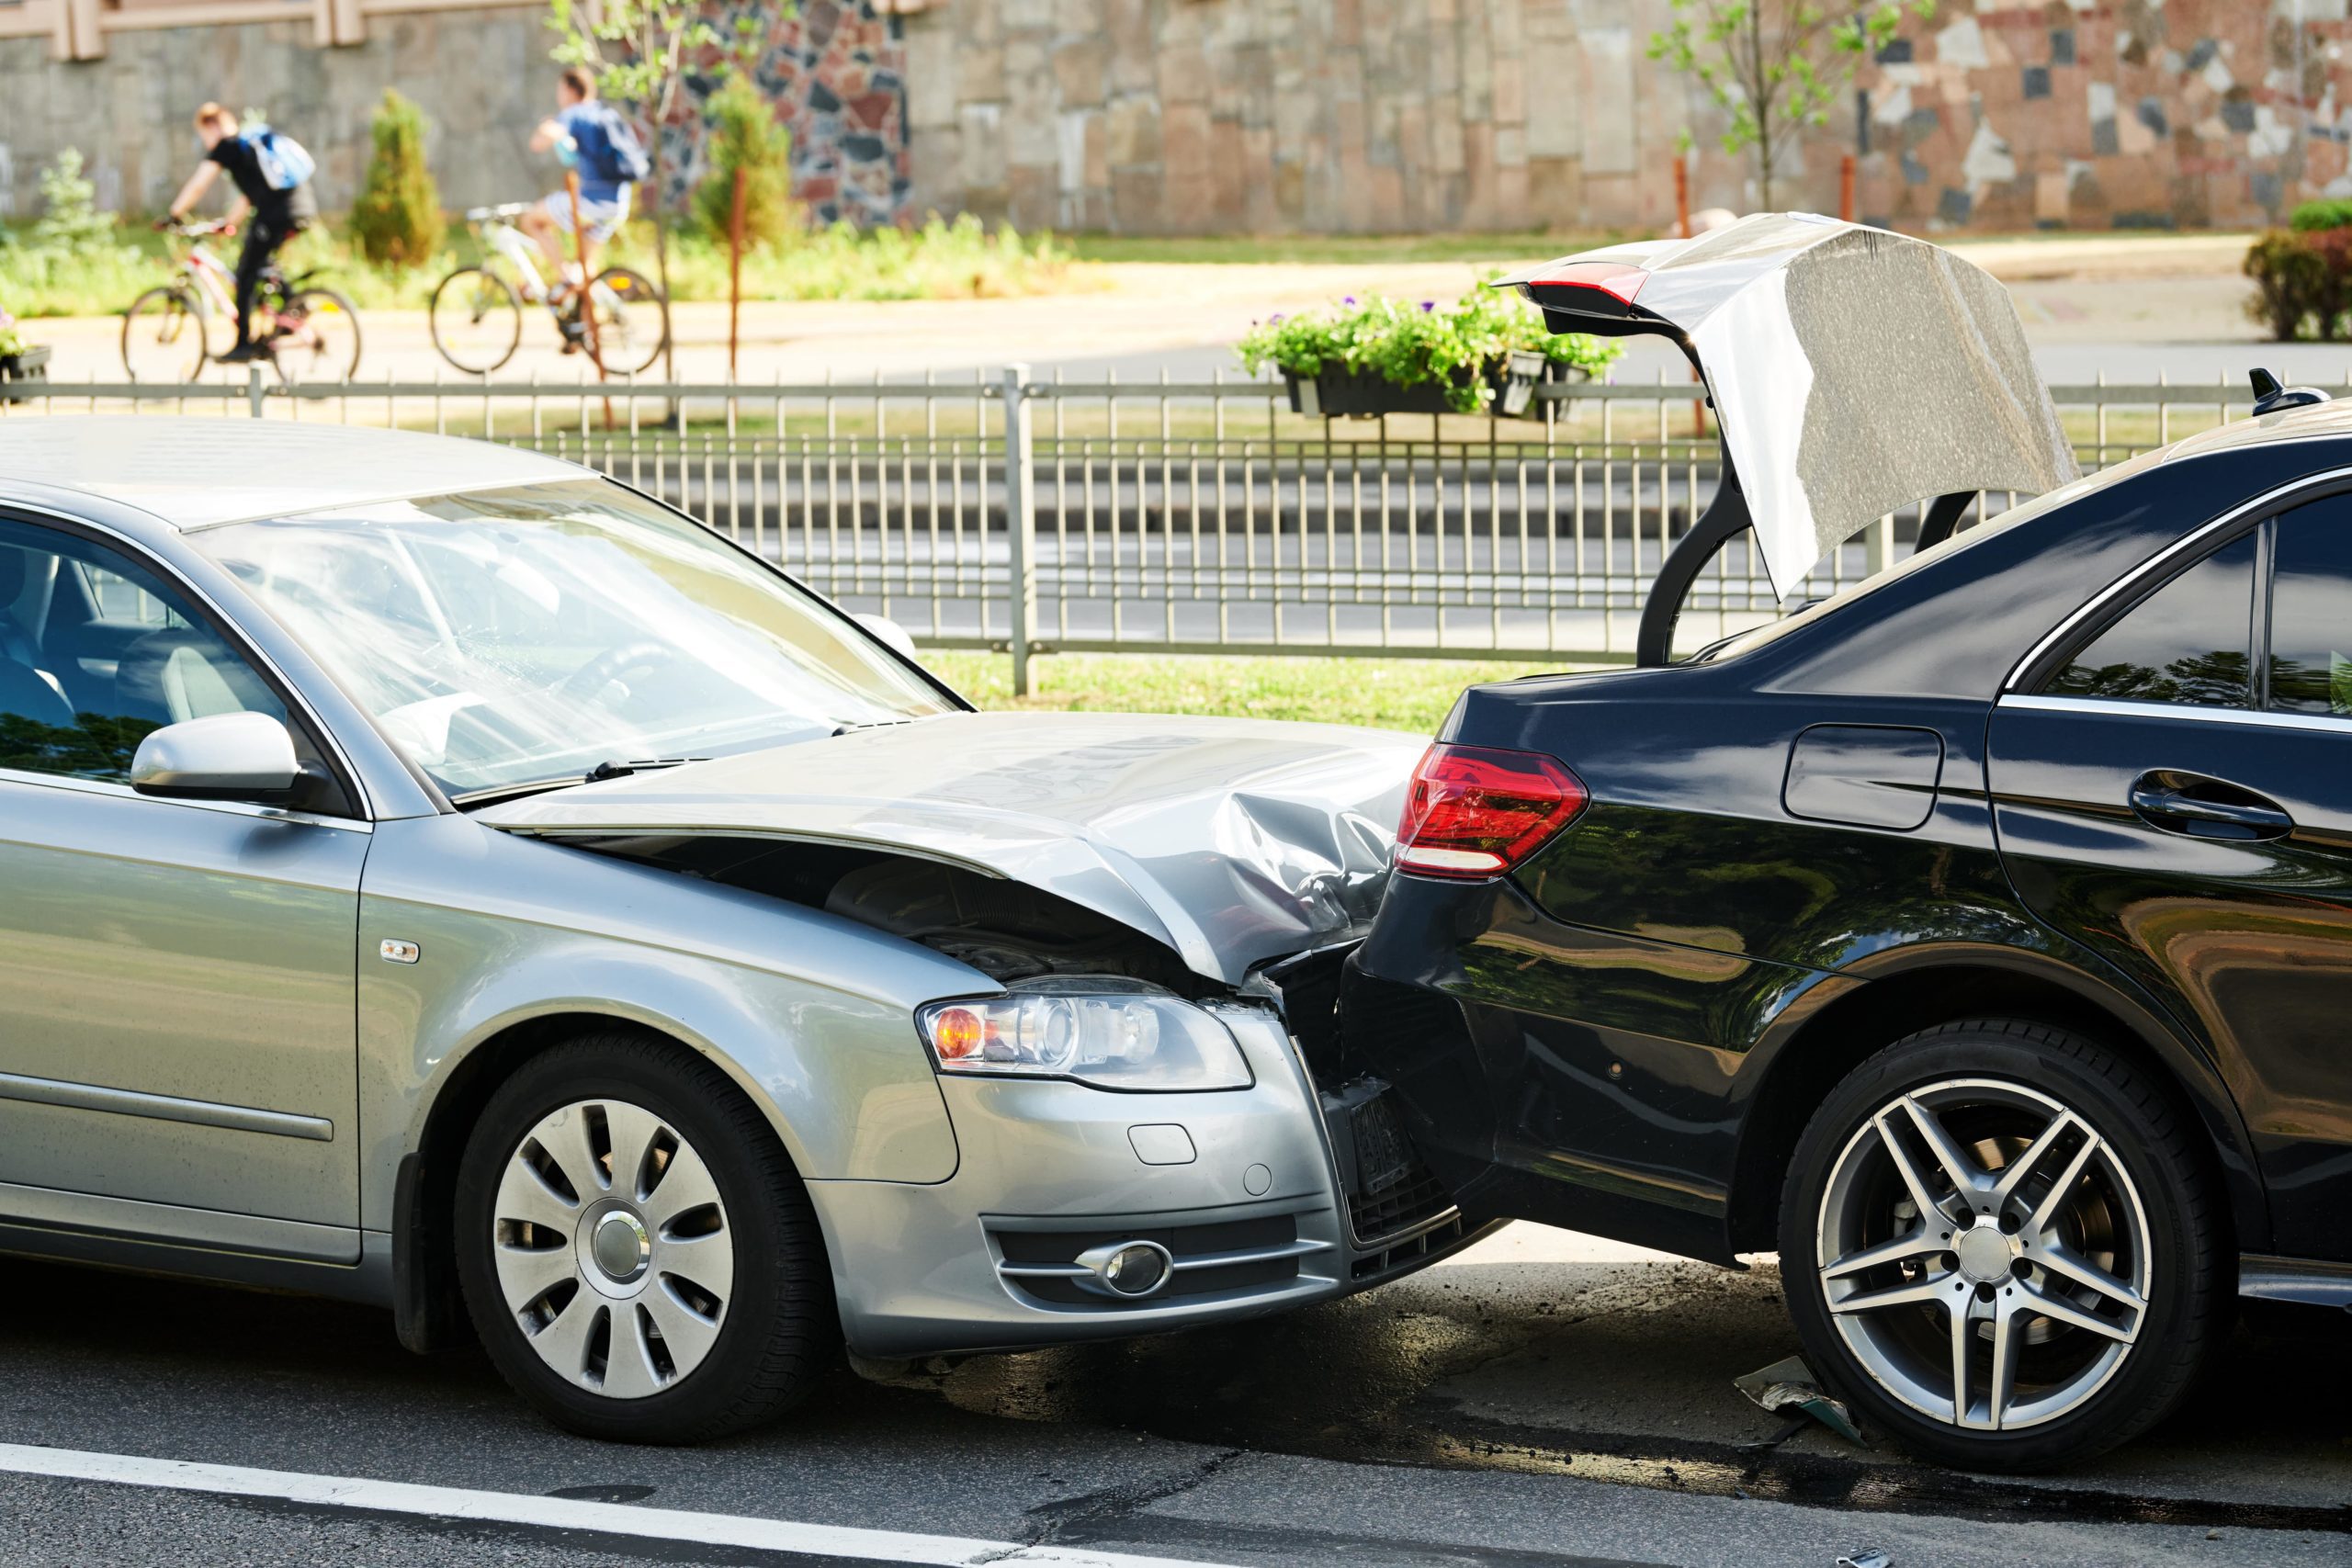 Why You Need an Attorney After Your Montana Car Accident